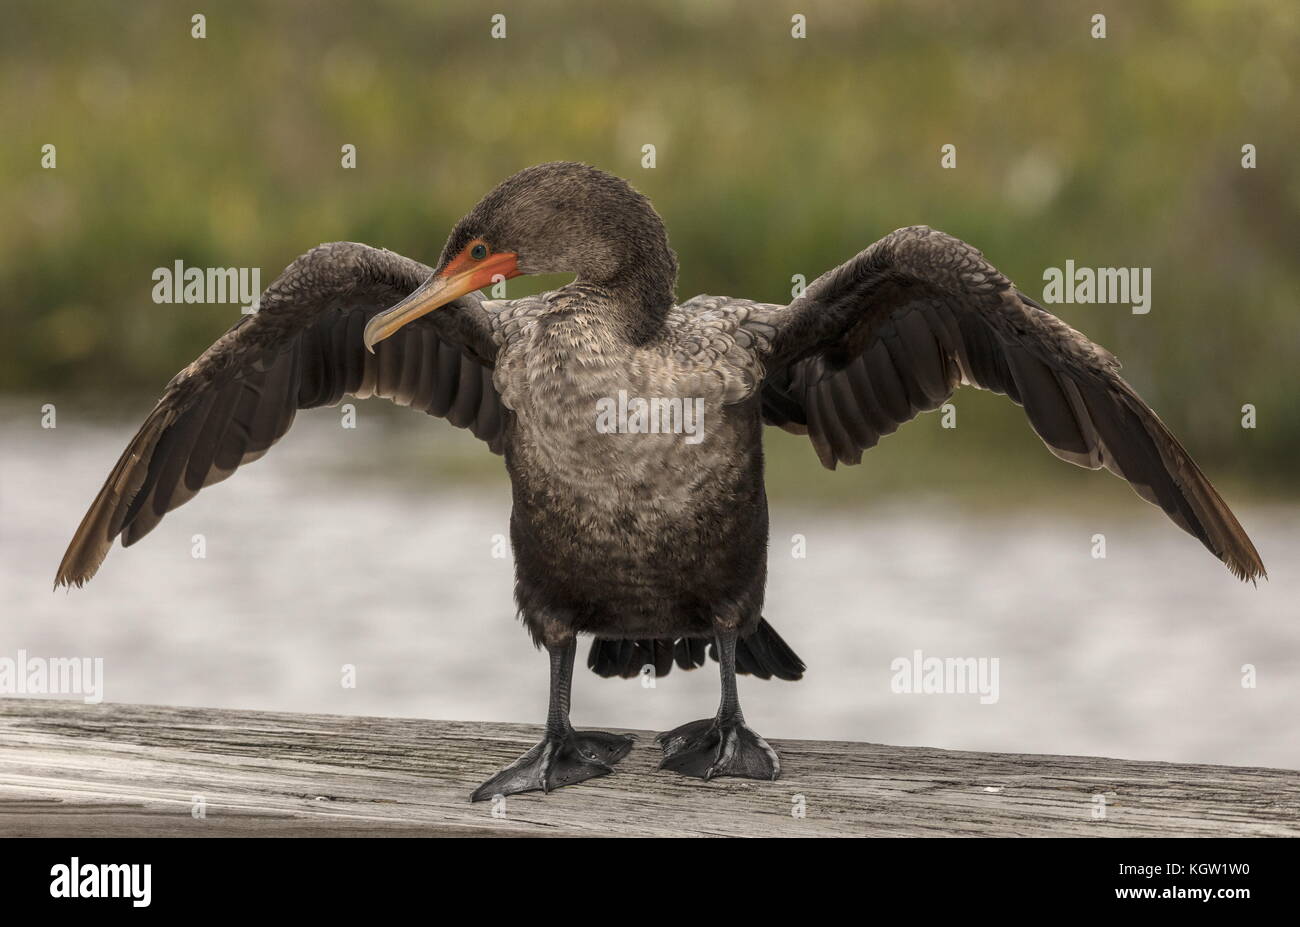 Immature Double-crested cormorant, Phalacrocorax auritus, in the subspecies known as Florida cormorant, Phalacrocorax auritus floridanus. Drying wings Stock Photo